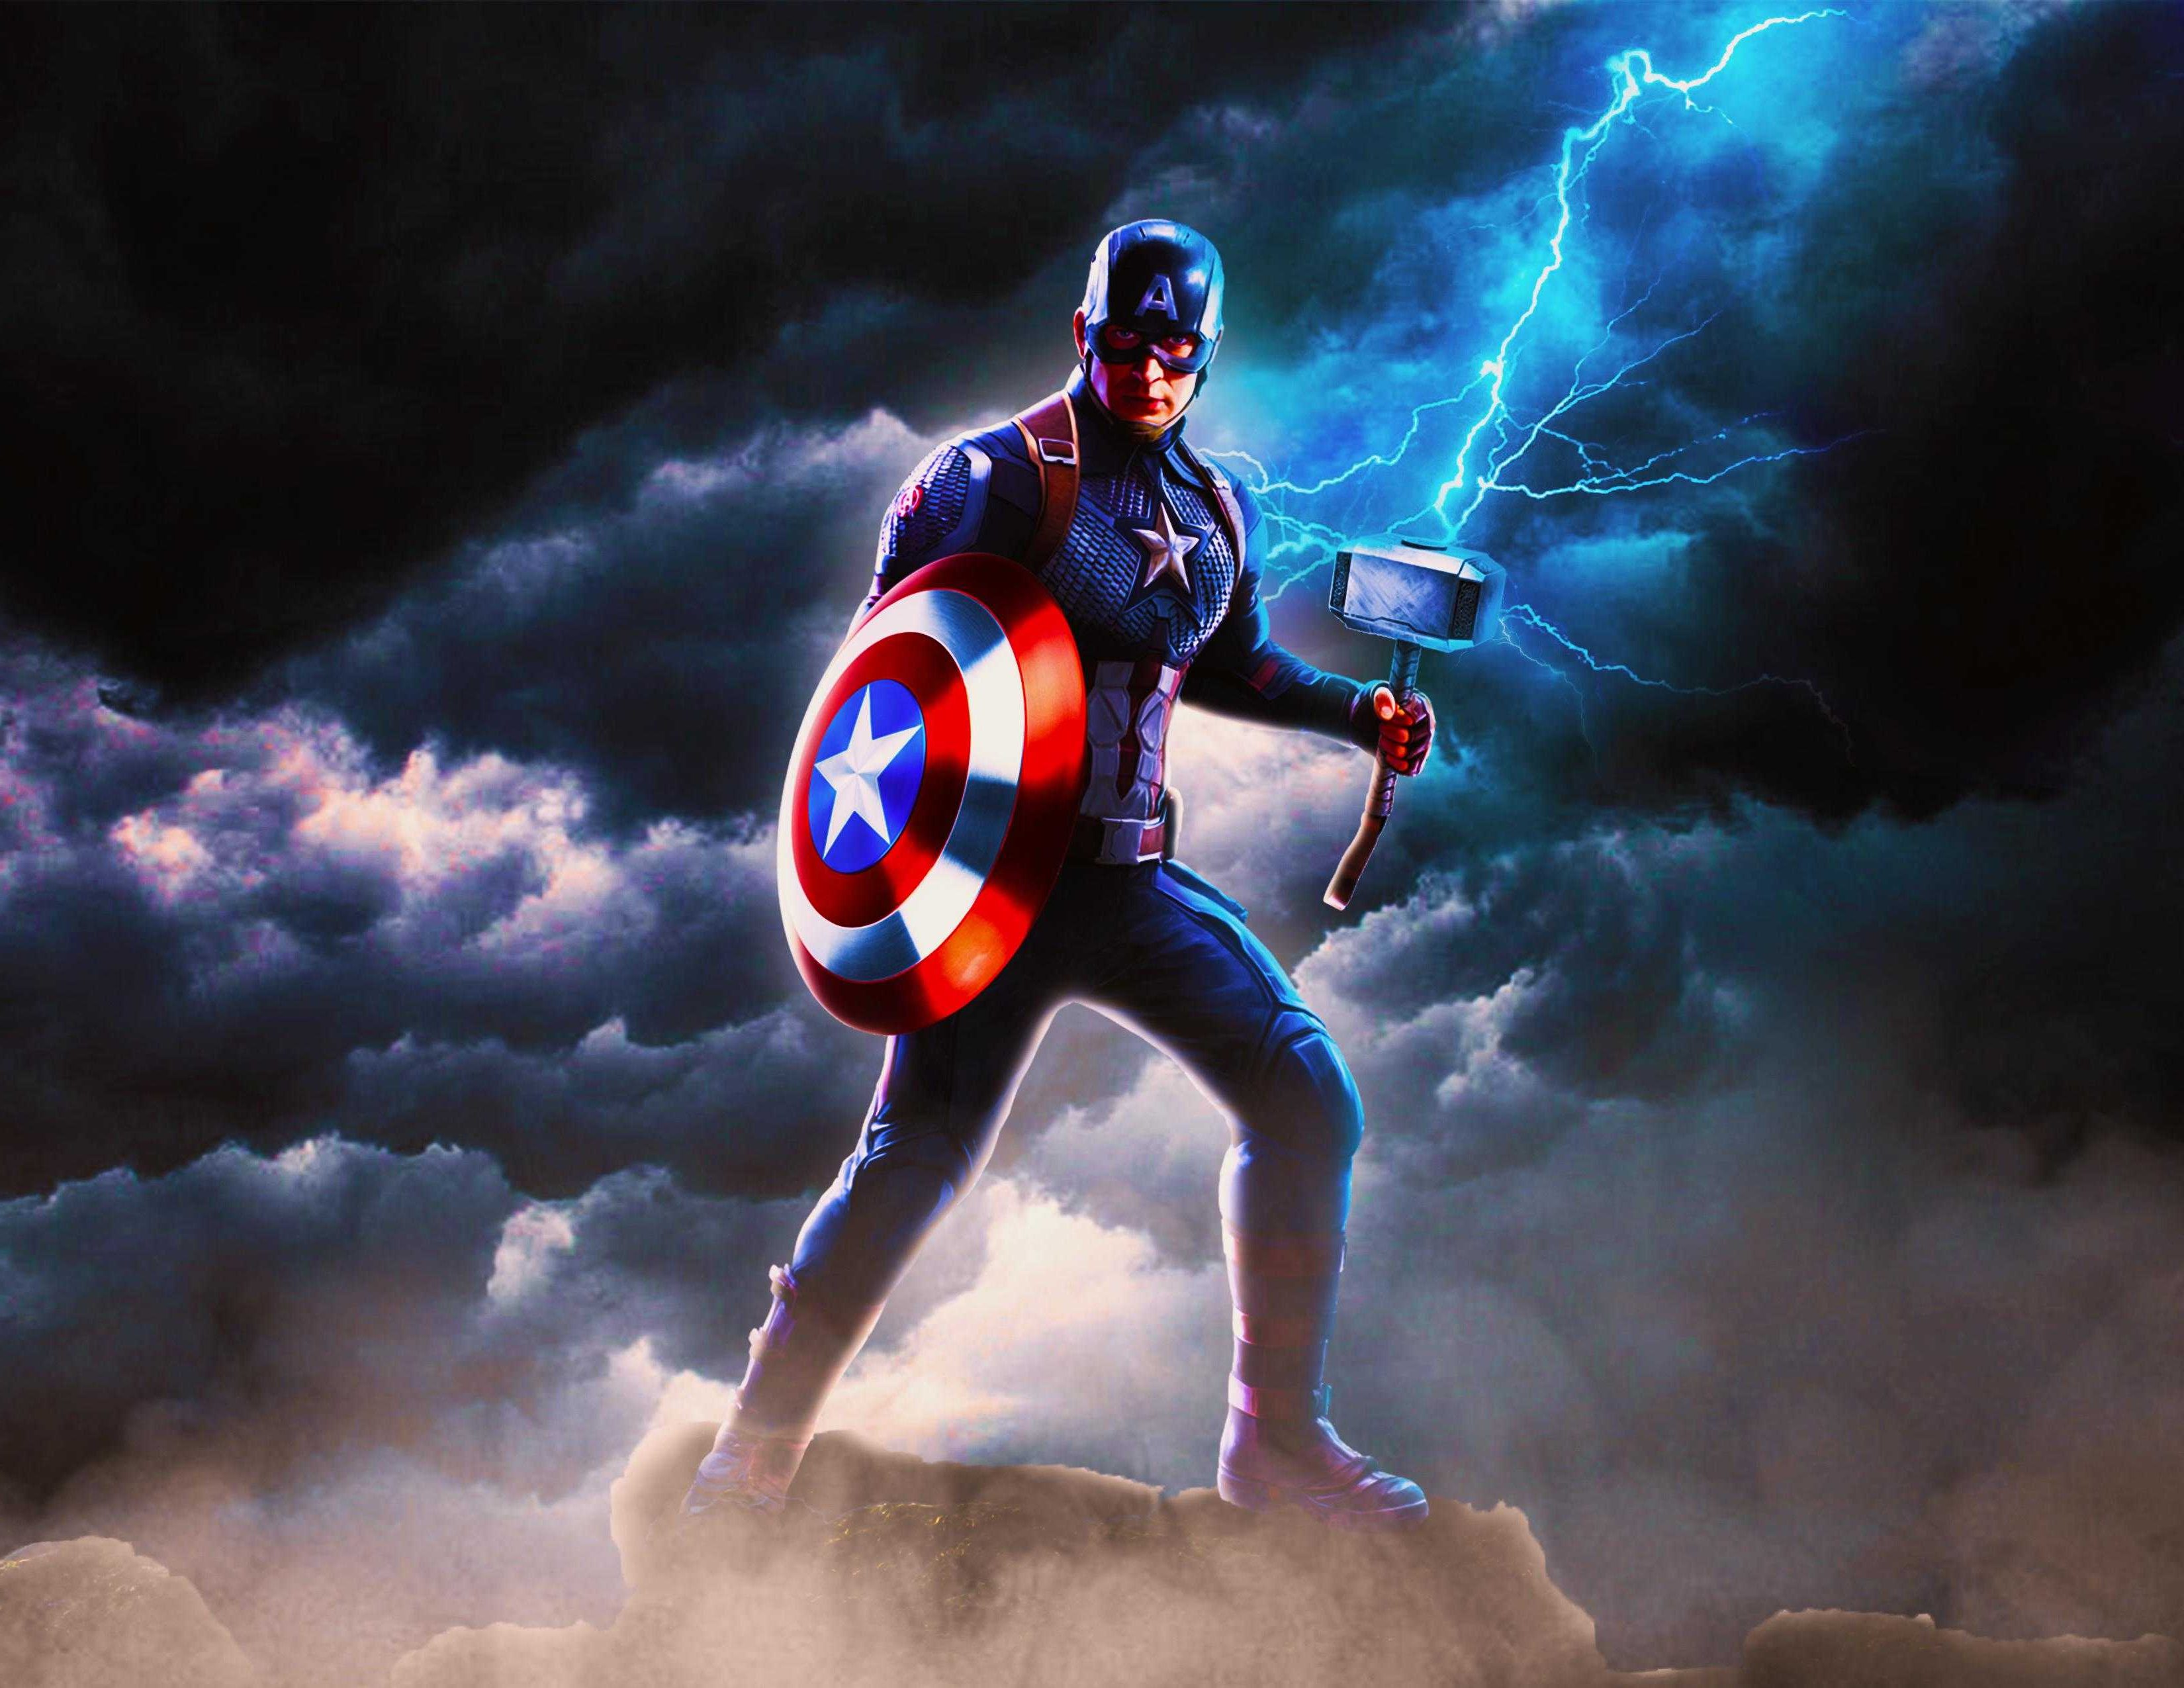 Captain America facing camera with shield held against his arm